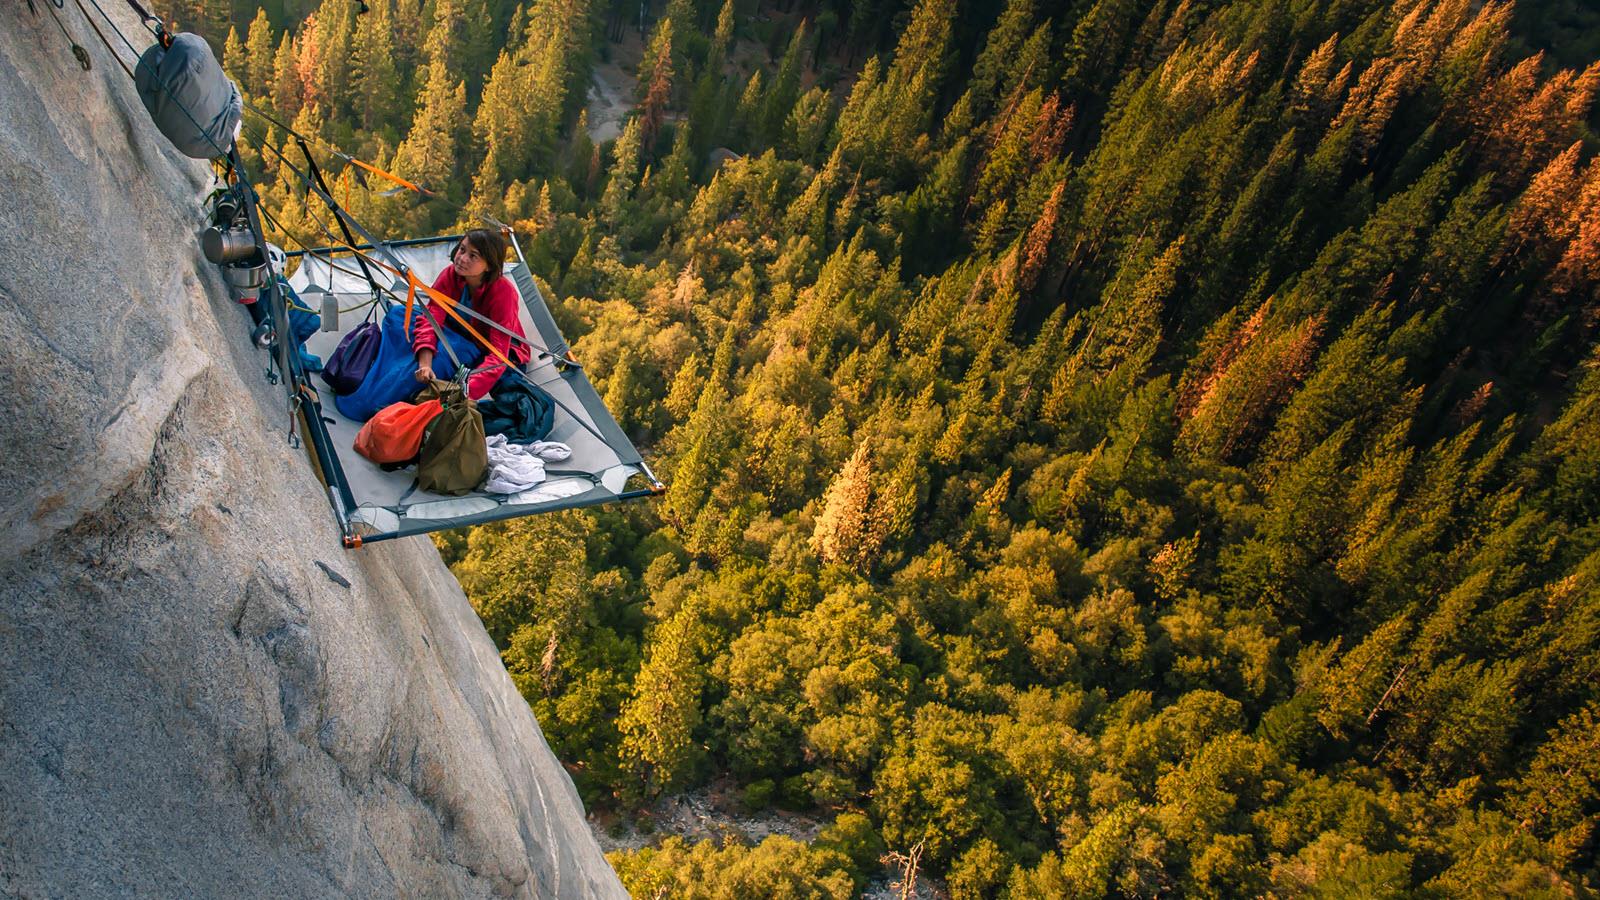 Climber takes a break from climbing hundreds of feet above the trees